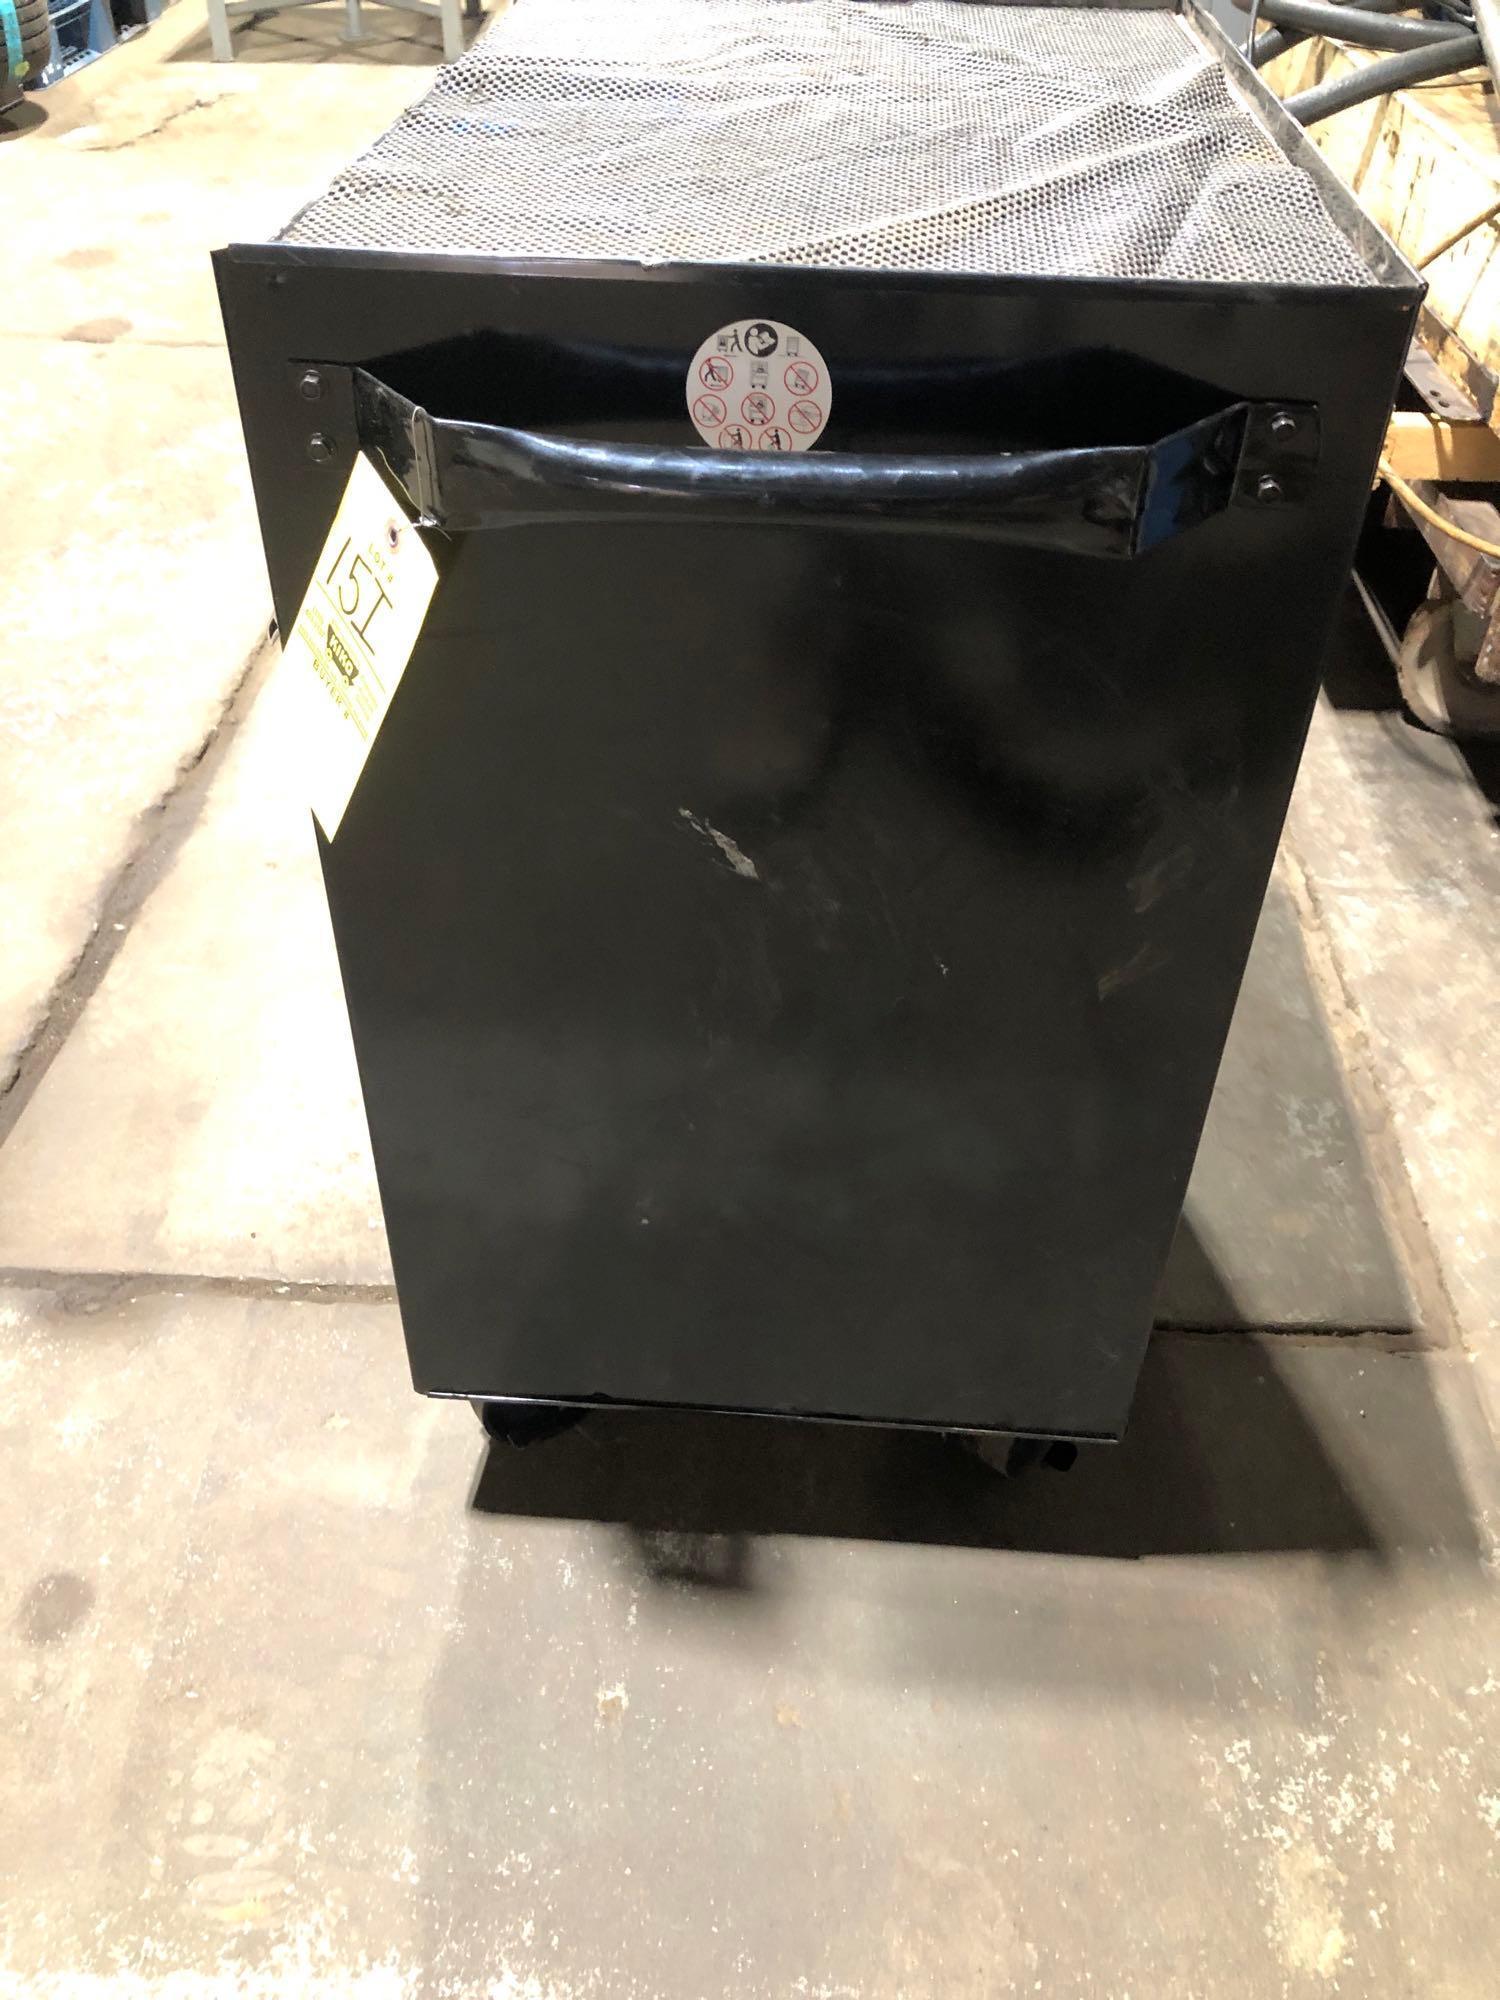 Tool box, black bottom section with casters, new.